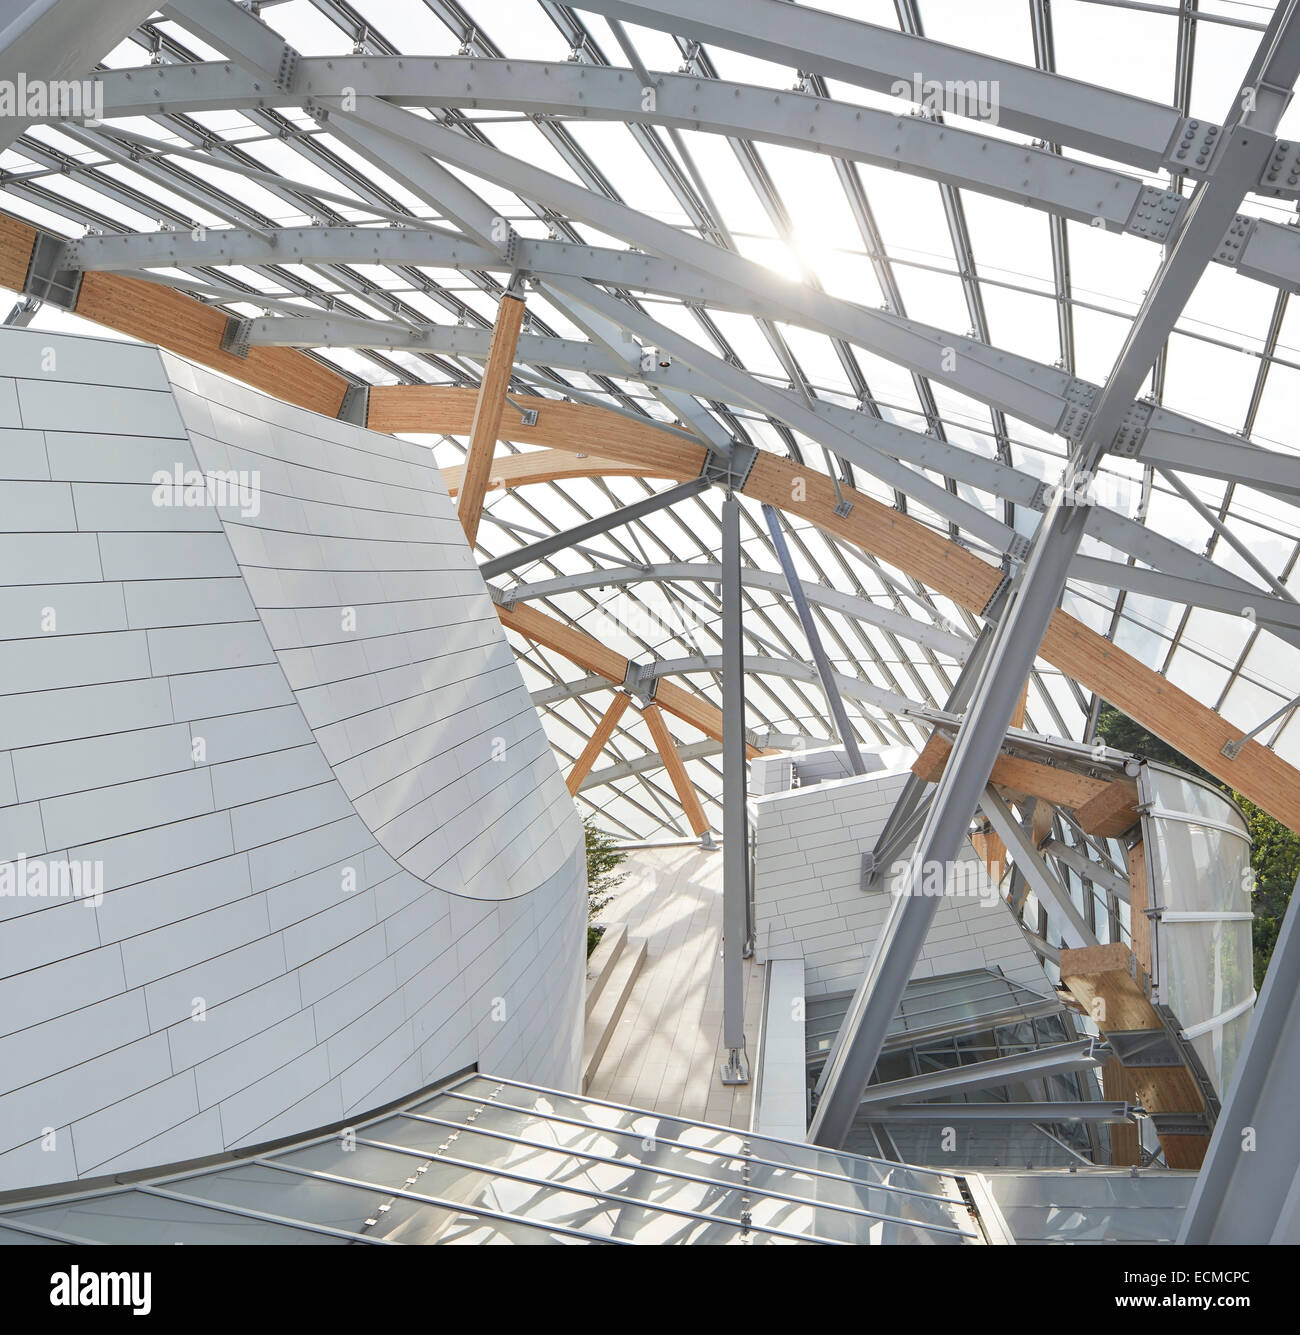 Fondation Louis Vuitton, Designed by Gehry Partners